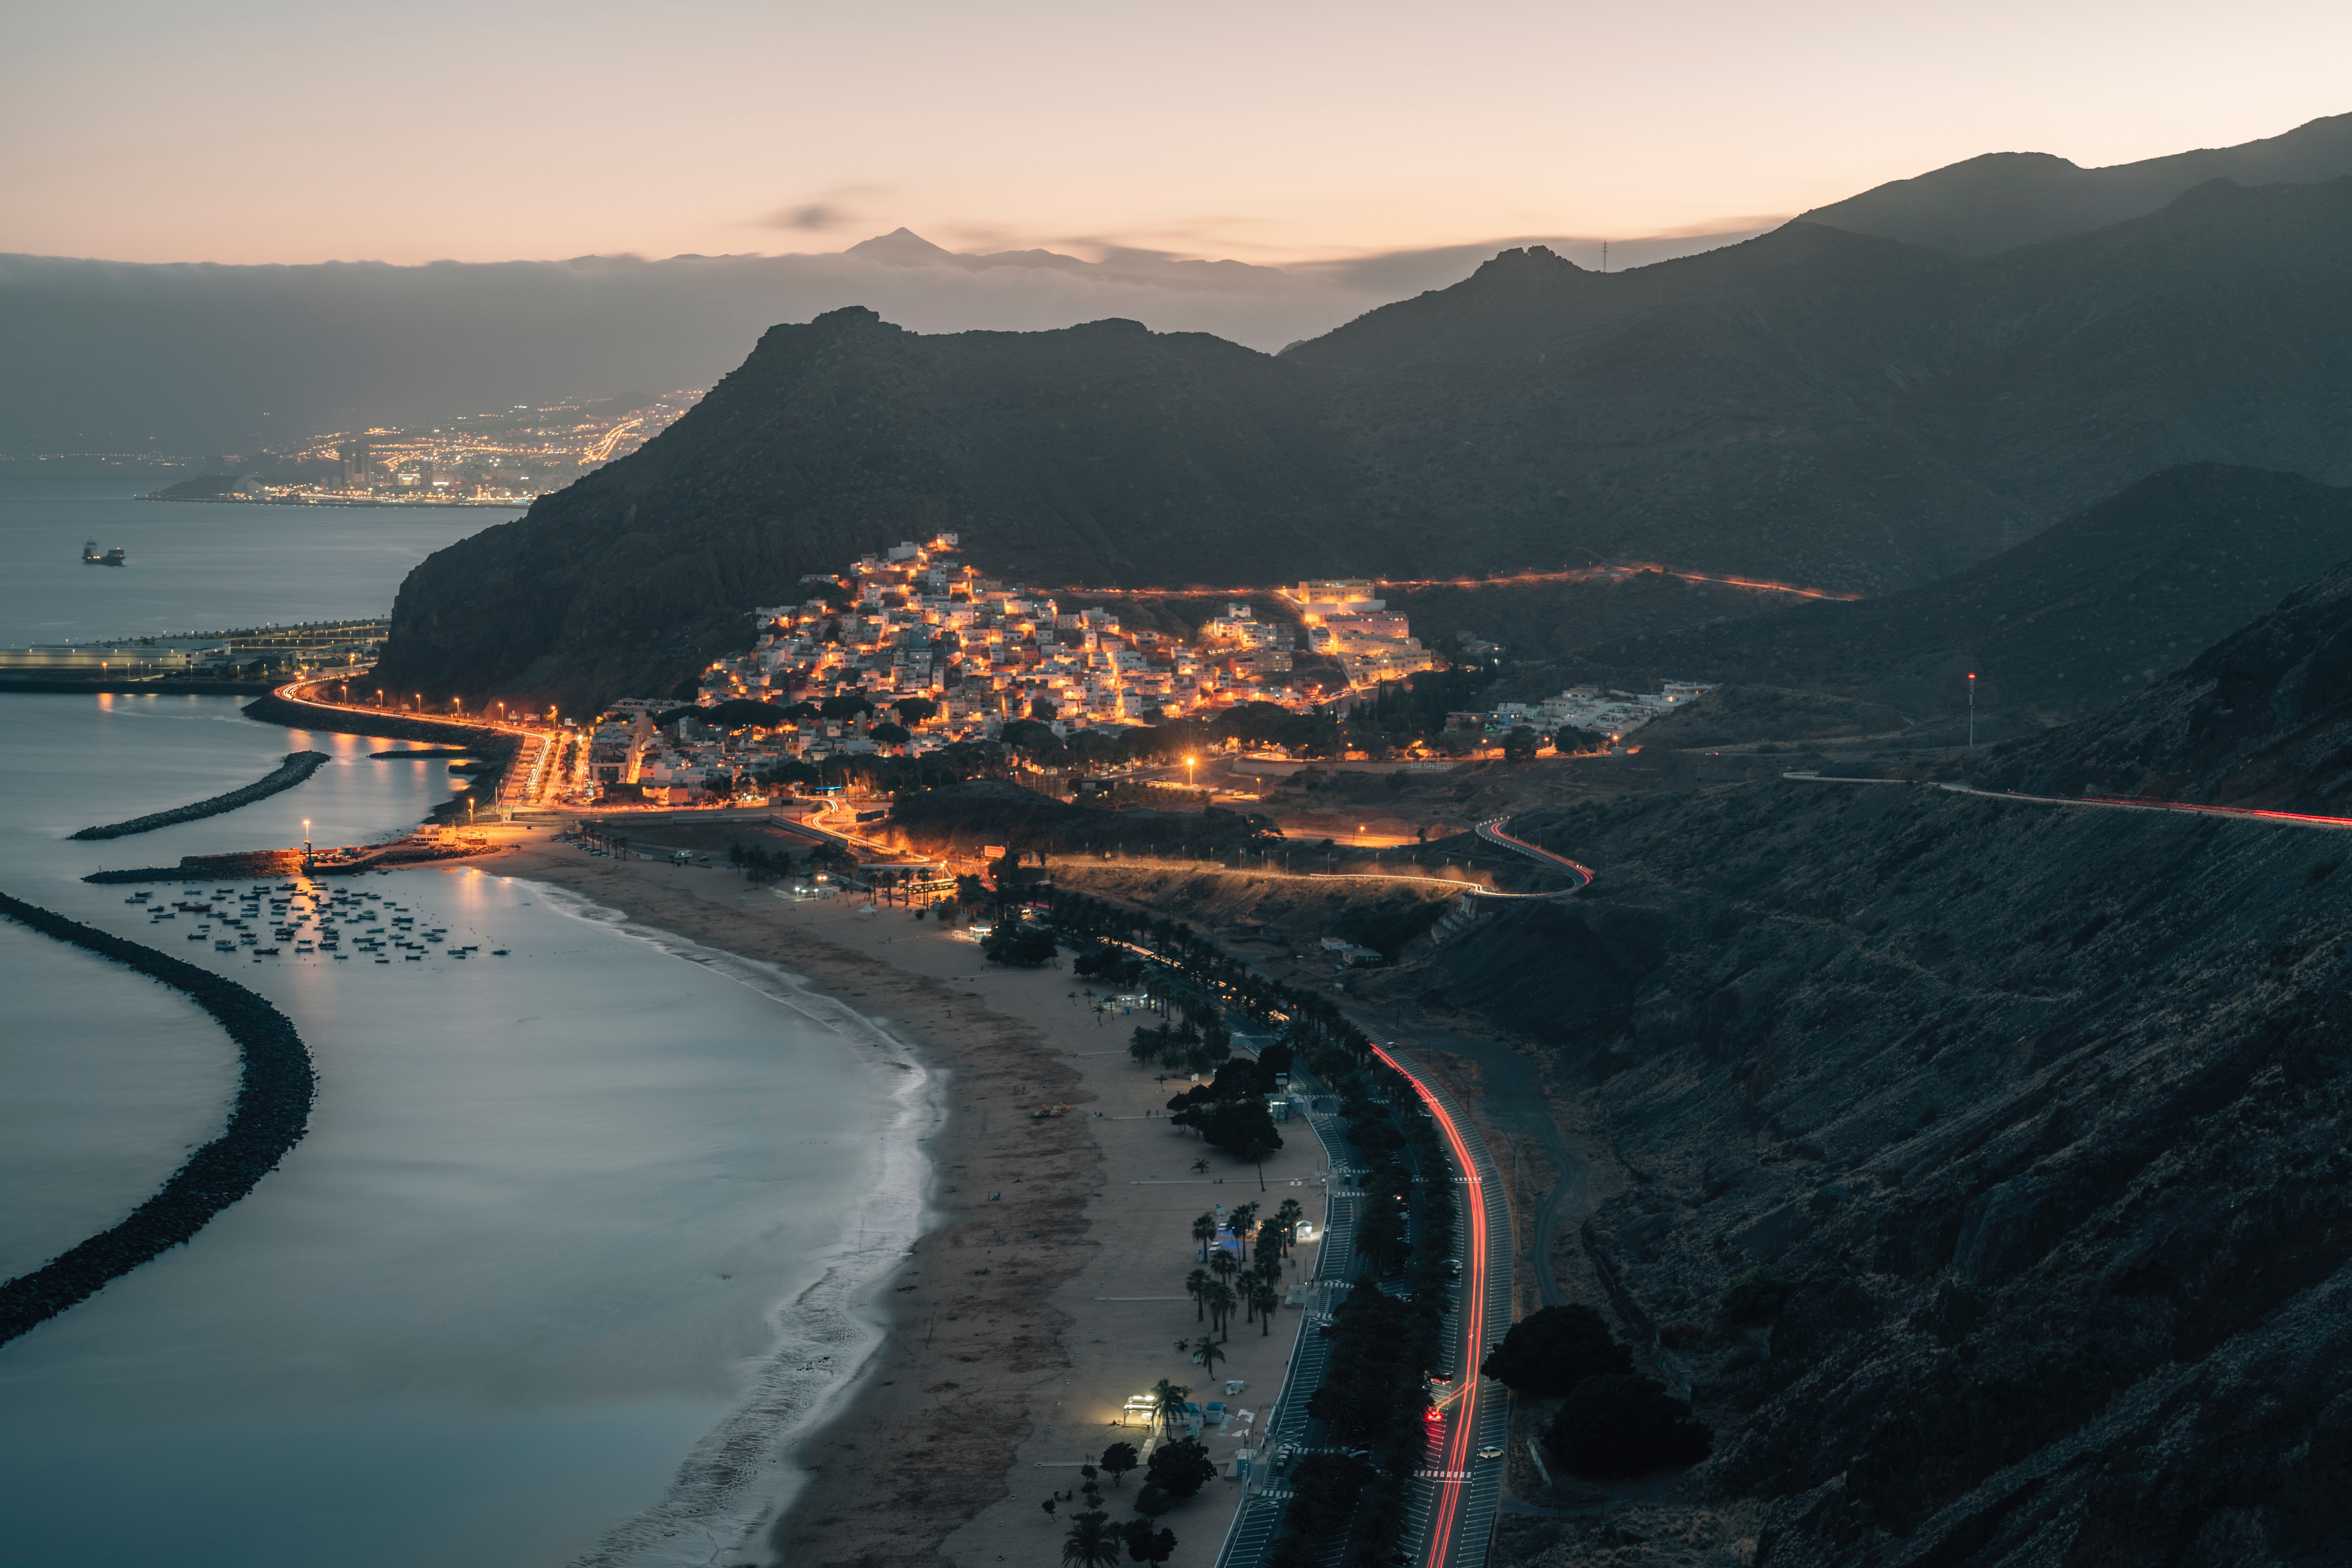 The Canary Islands Wallpapers